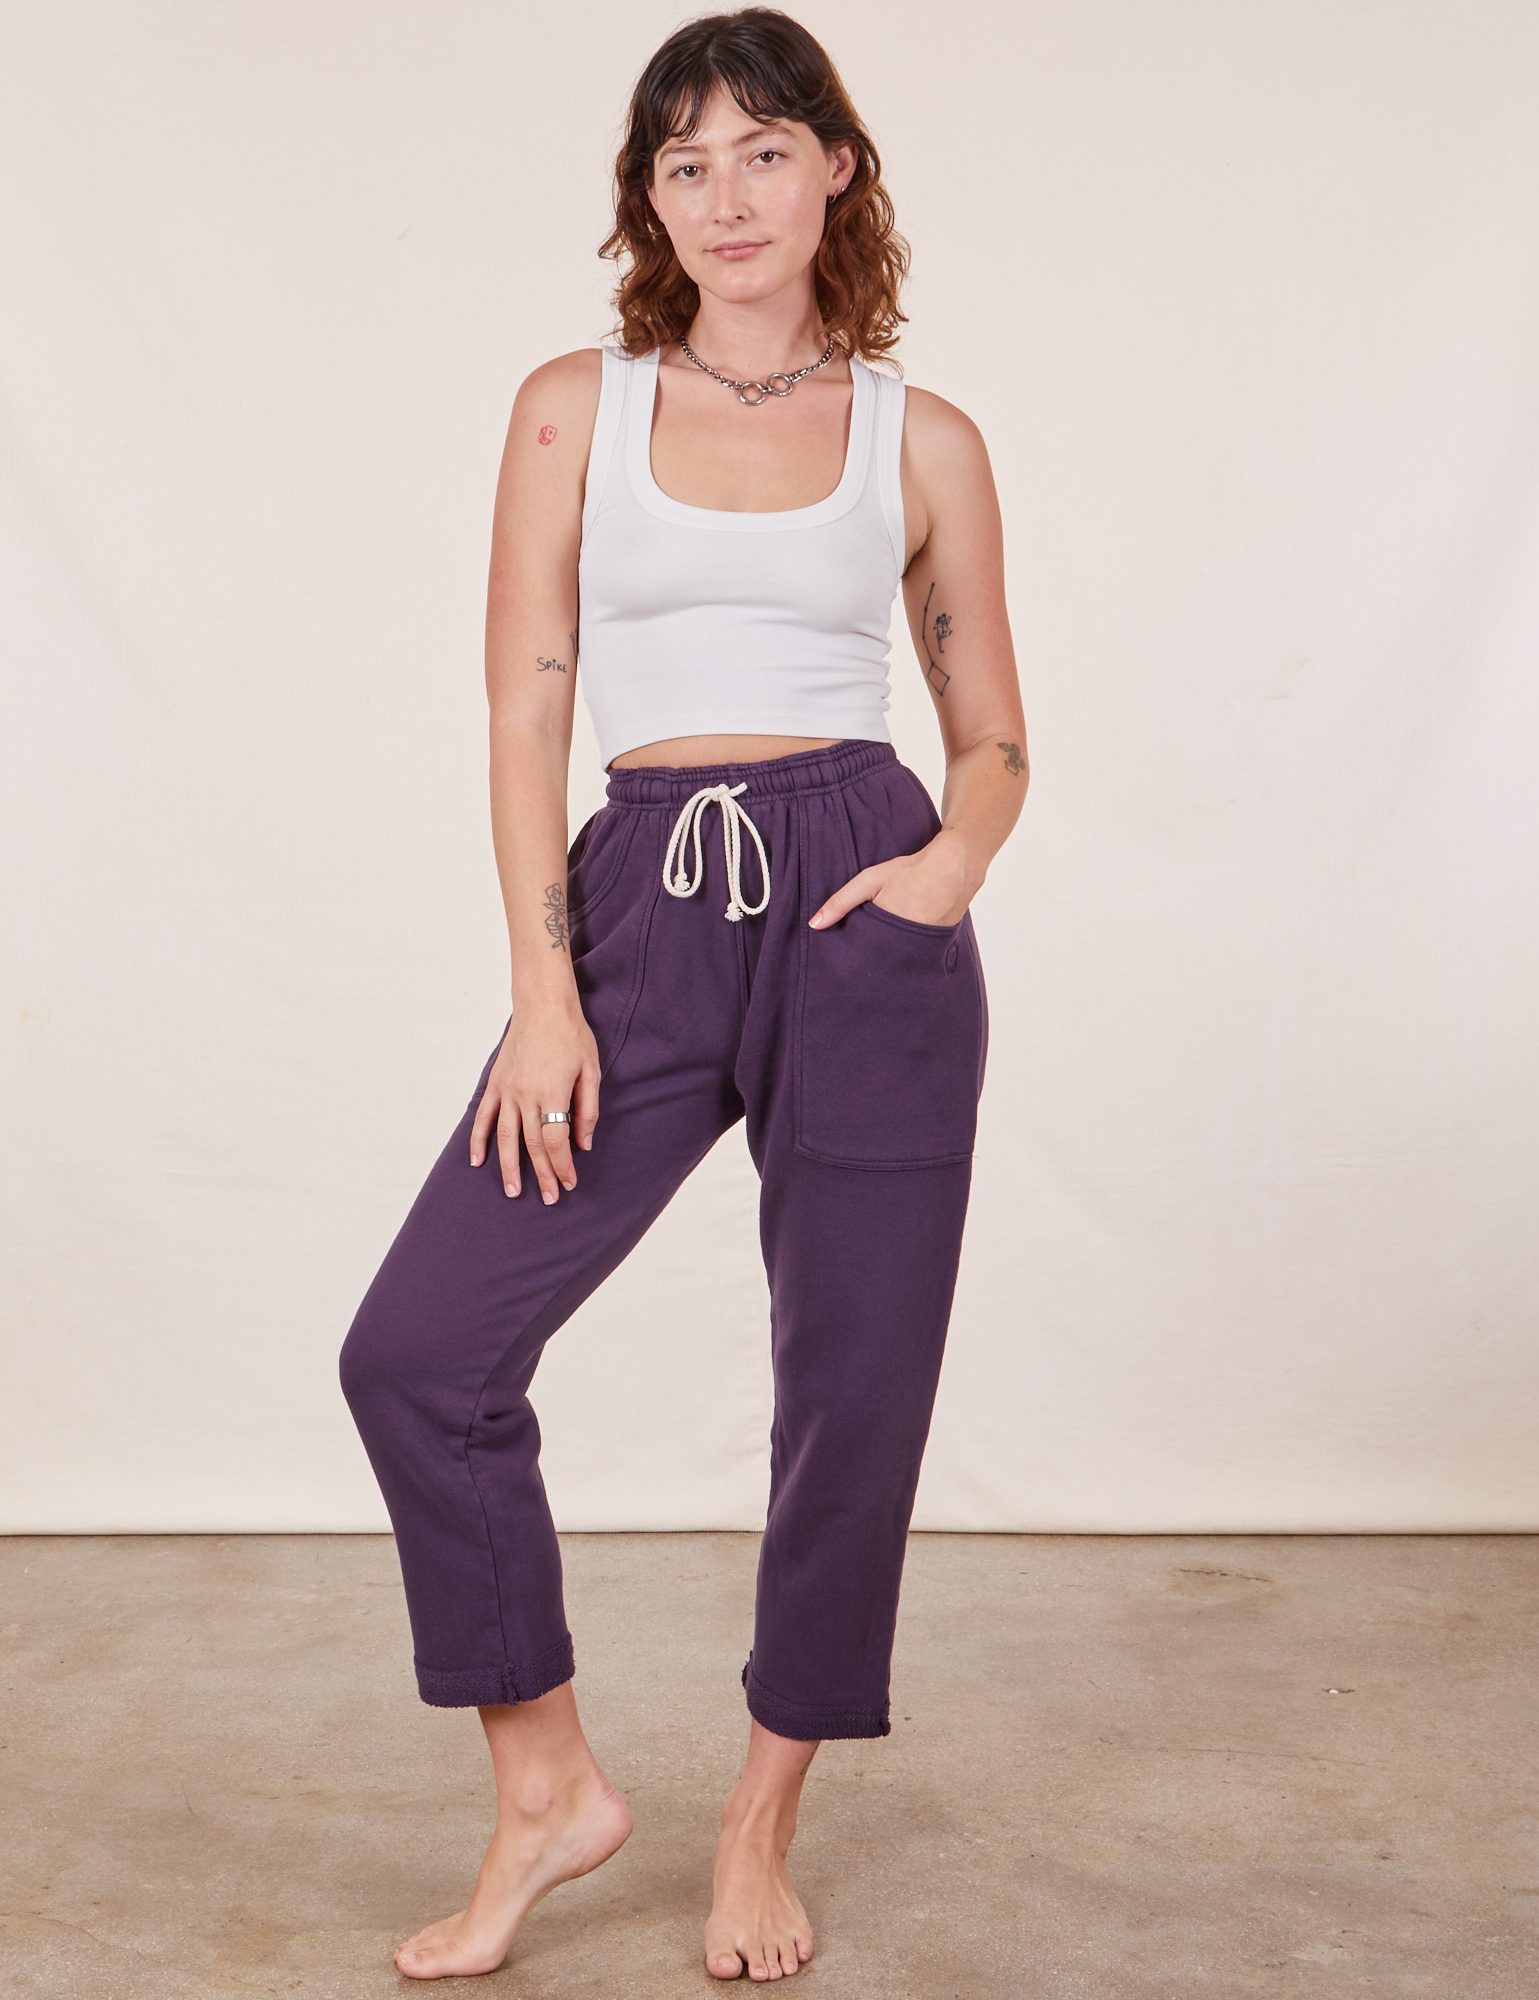 Alex is 5&#39;8&quot; and wearing XXS Cropped Rolled Cuff Sweatpants in Nebula Purple paired with vintage off-white Cropped Tank Top